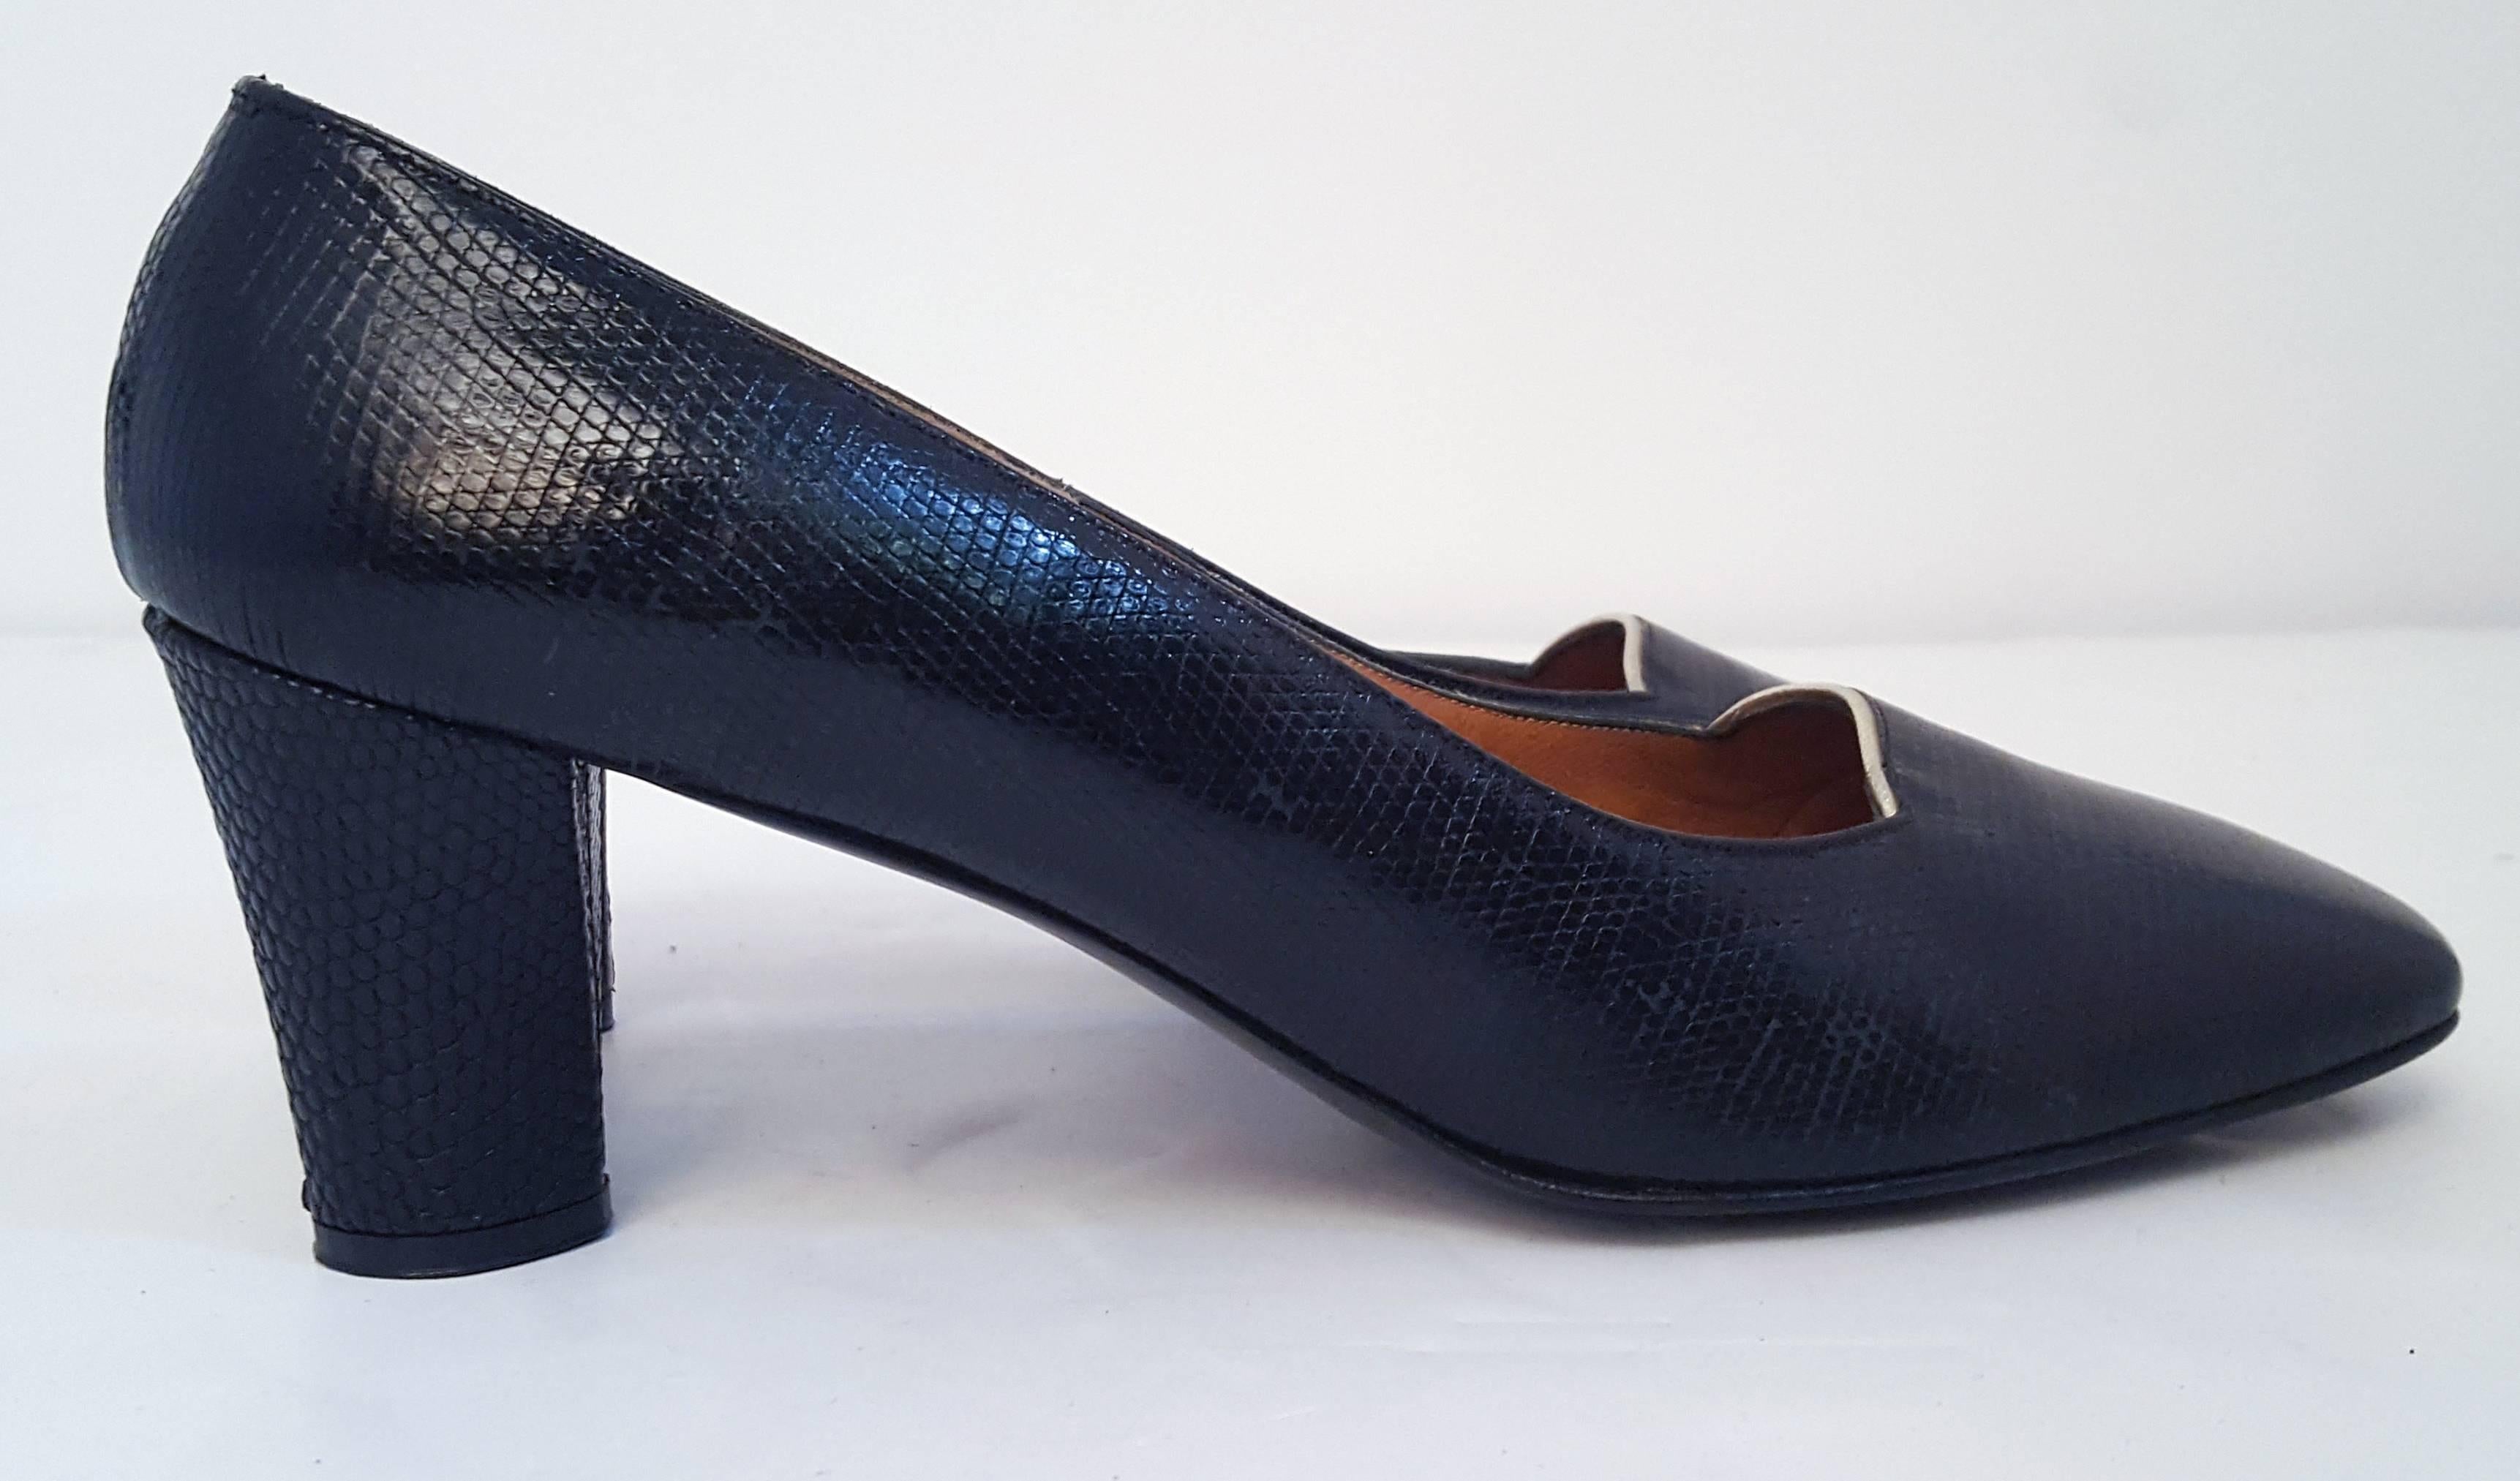 60s Black Pressed Leather Low Heel. Silver piping detail. Marked US size 8. 
